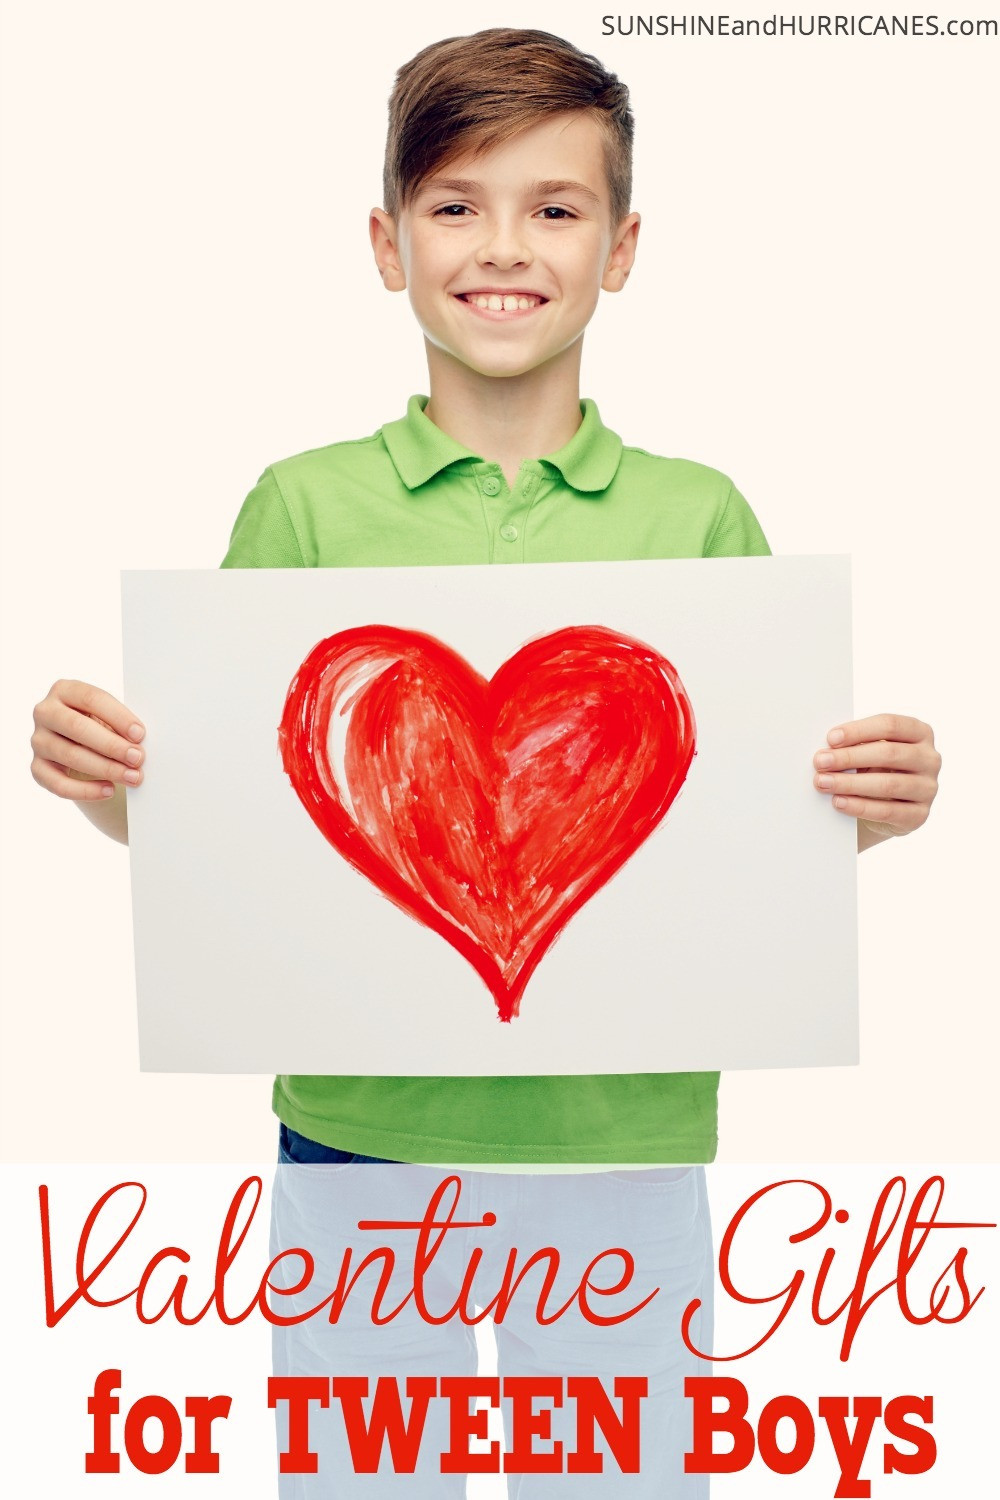 Boy Valentines Day Gift
 Valentine Gifts for Tween Boys Sweet and Silly Just Like Him